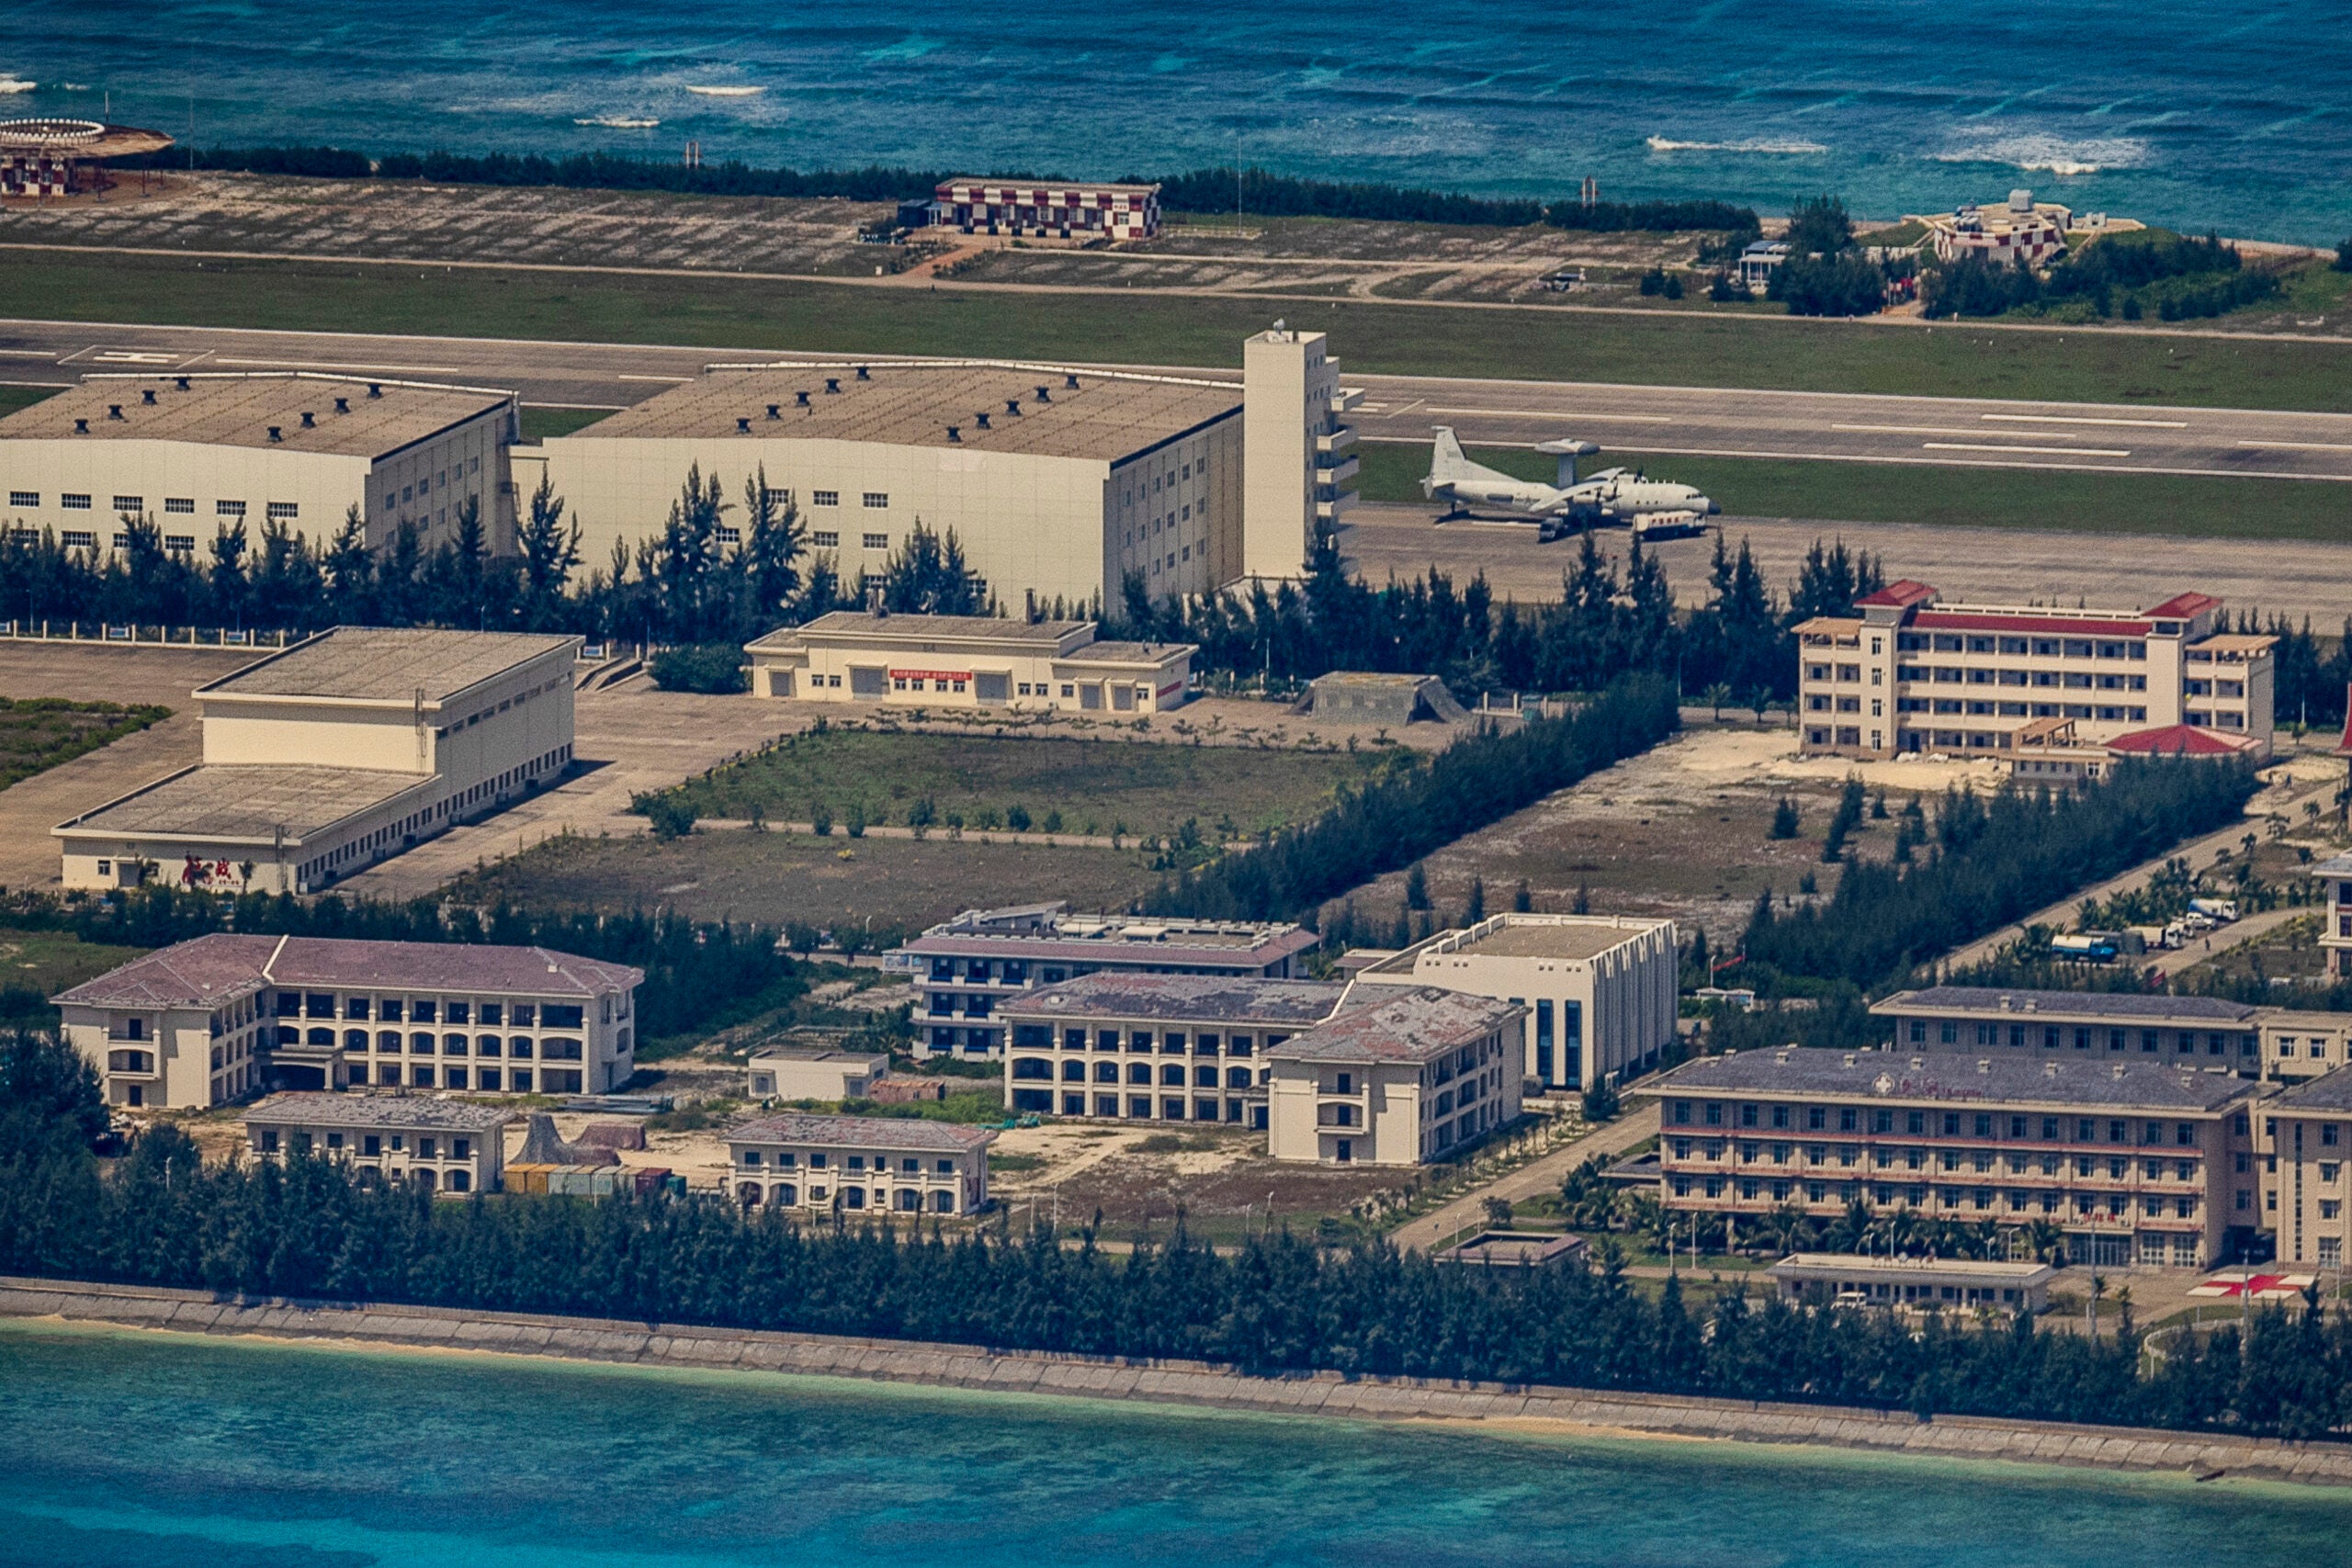 SPRATLY ISLANDS, AT SEA - OCTOBER 25: A plane sits on an airfield next to buildings and structures on the artificial island built by China in Fiery Cross Reef on October 25, 2022 in Spratly Islands, South China Sea. China has progressively asserted its claim of ownership over disputed islands in the South China Sea by artificially increasing the size of islands, creating new islands and building ports, military outposts and airstrips. The South China sea is an important trade route and is of significant interest as geopolitical tensions remain high in the region. (Photo by Ezra Acayan/Getty Images)